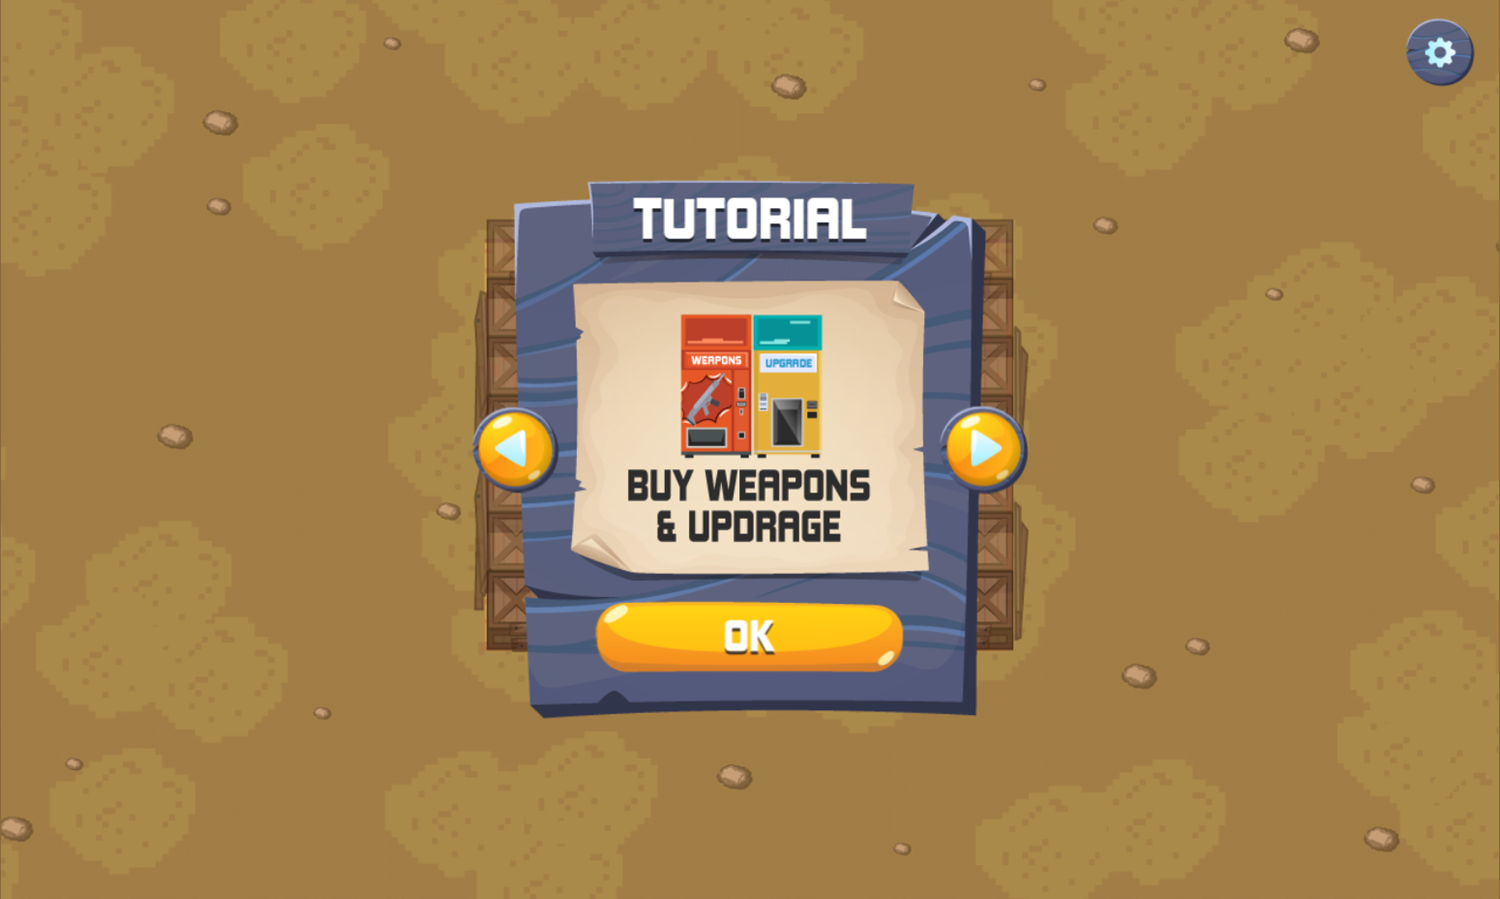 Zombie Attack Game Buy Weapons and Upgrades Tutorial Screen Screenshot.